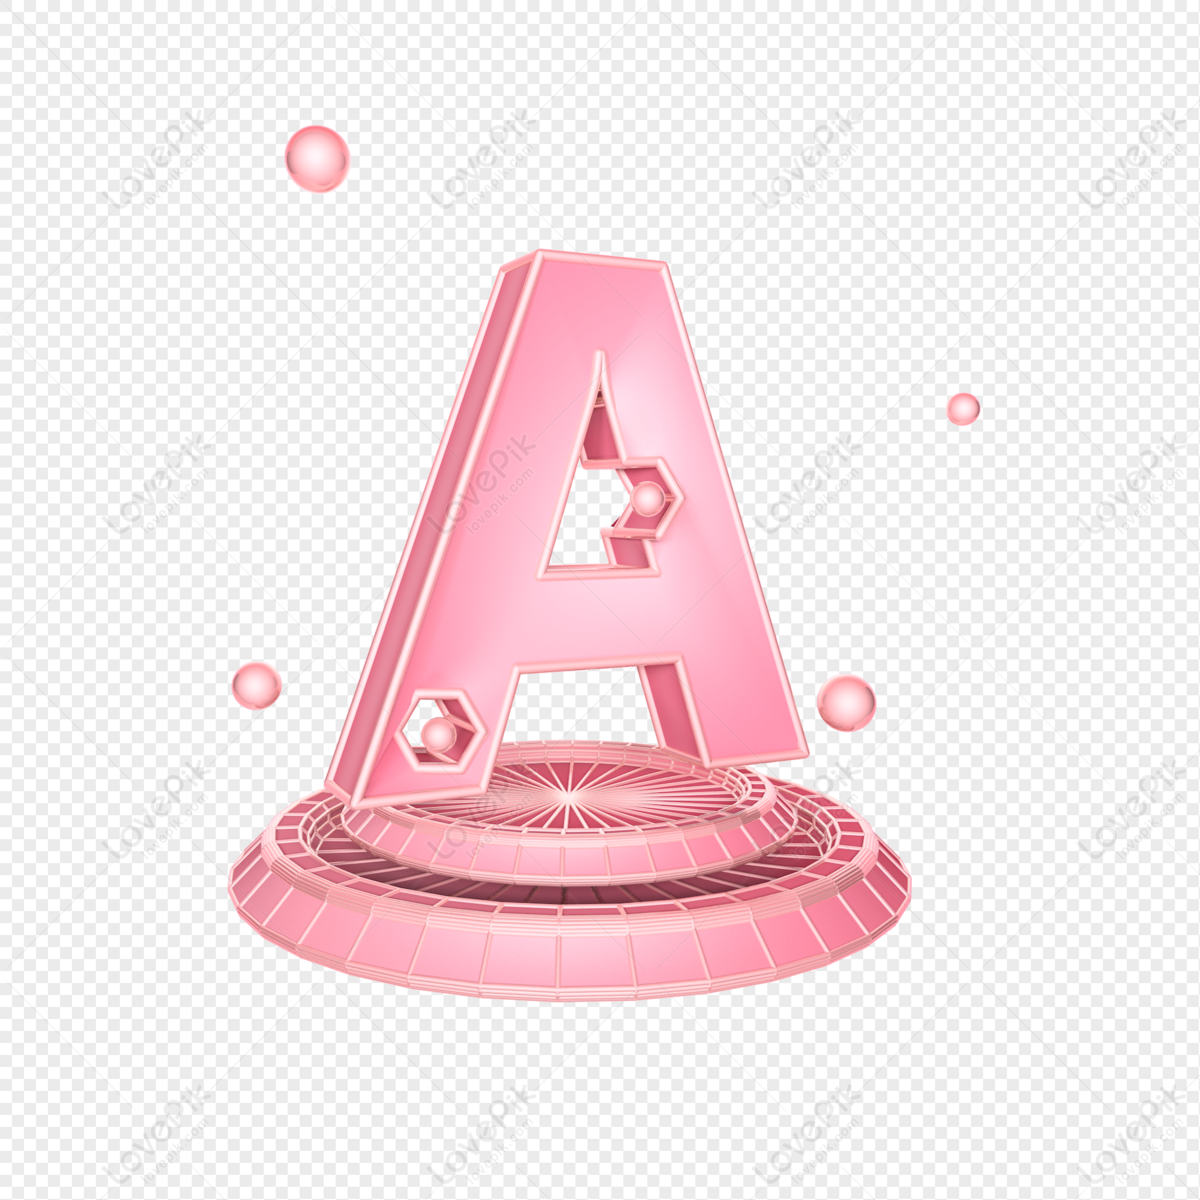 pink capital letter a